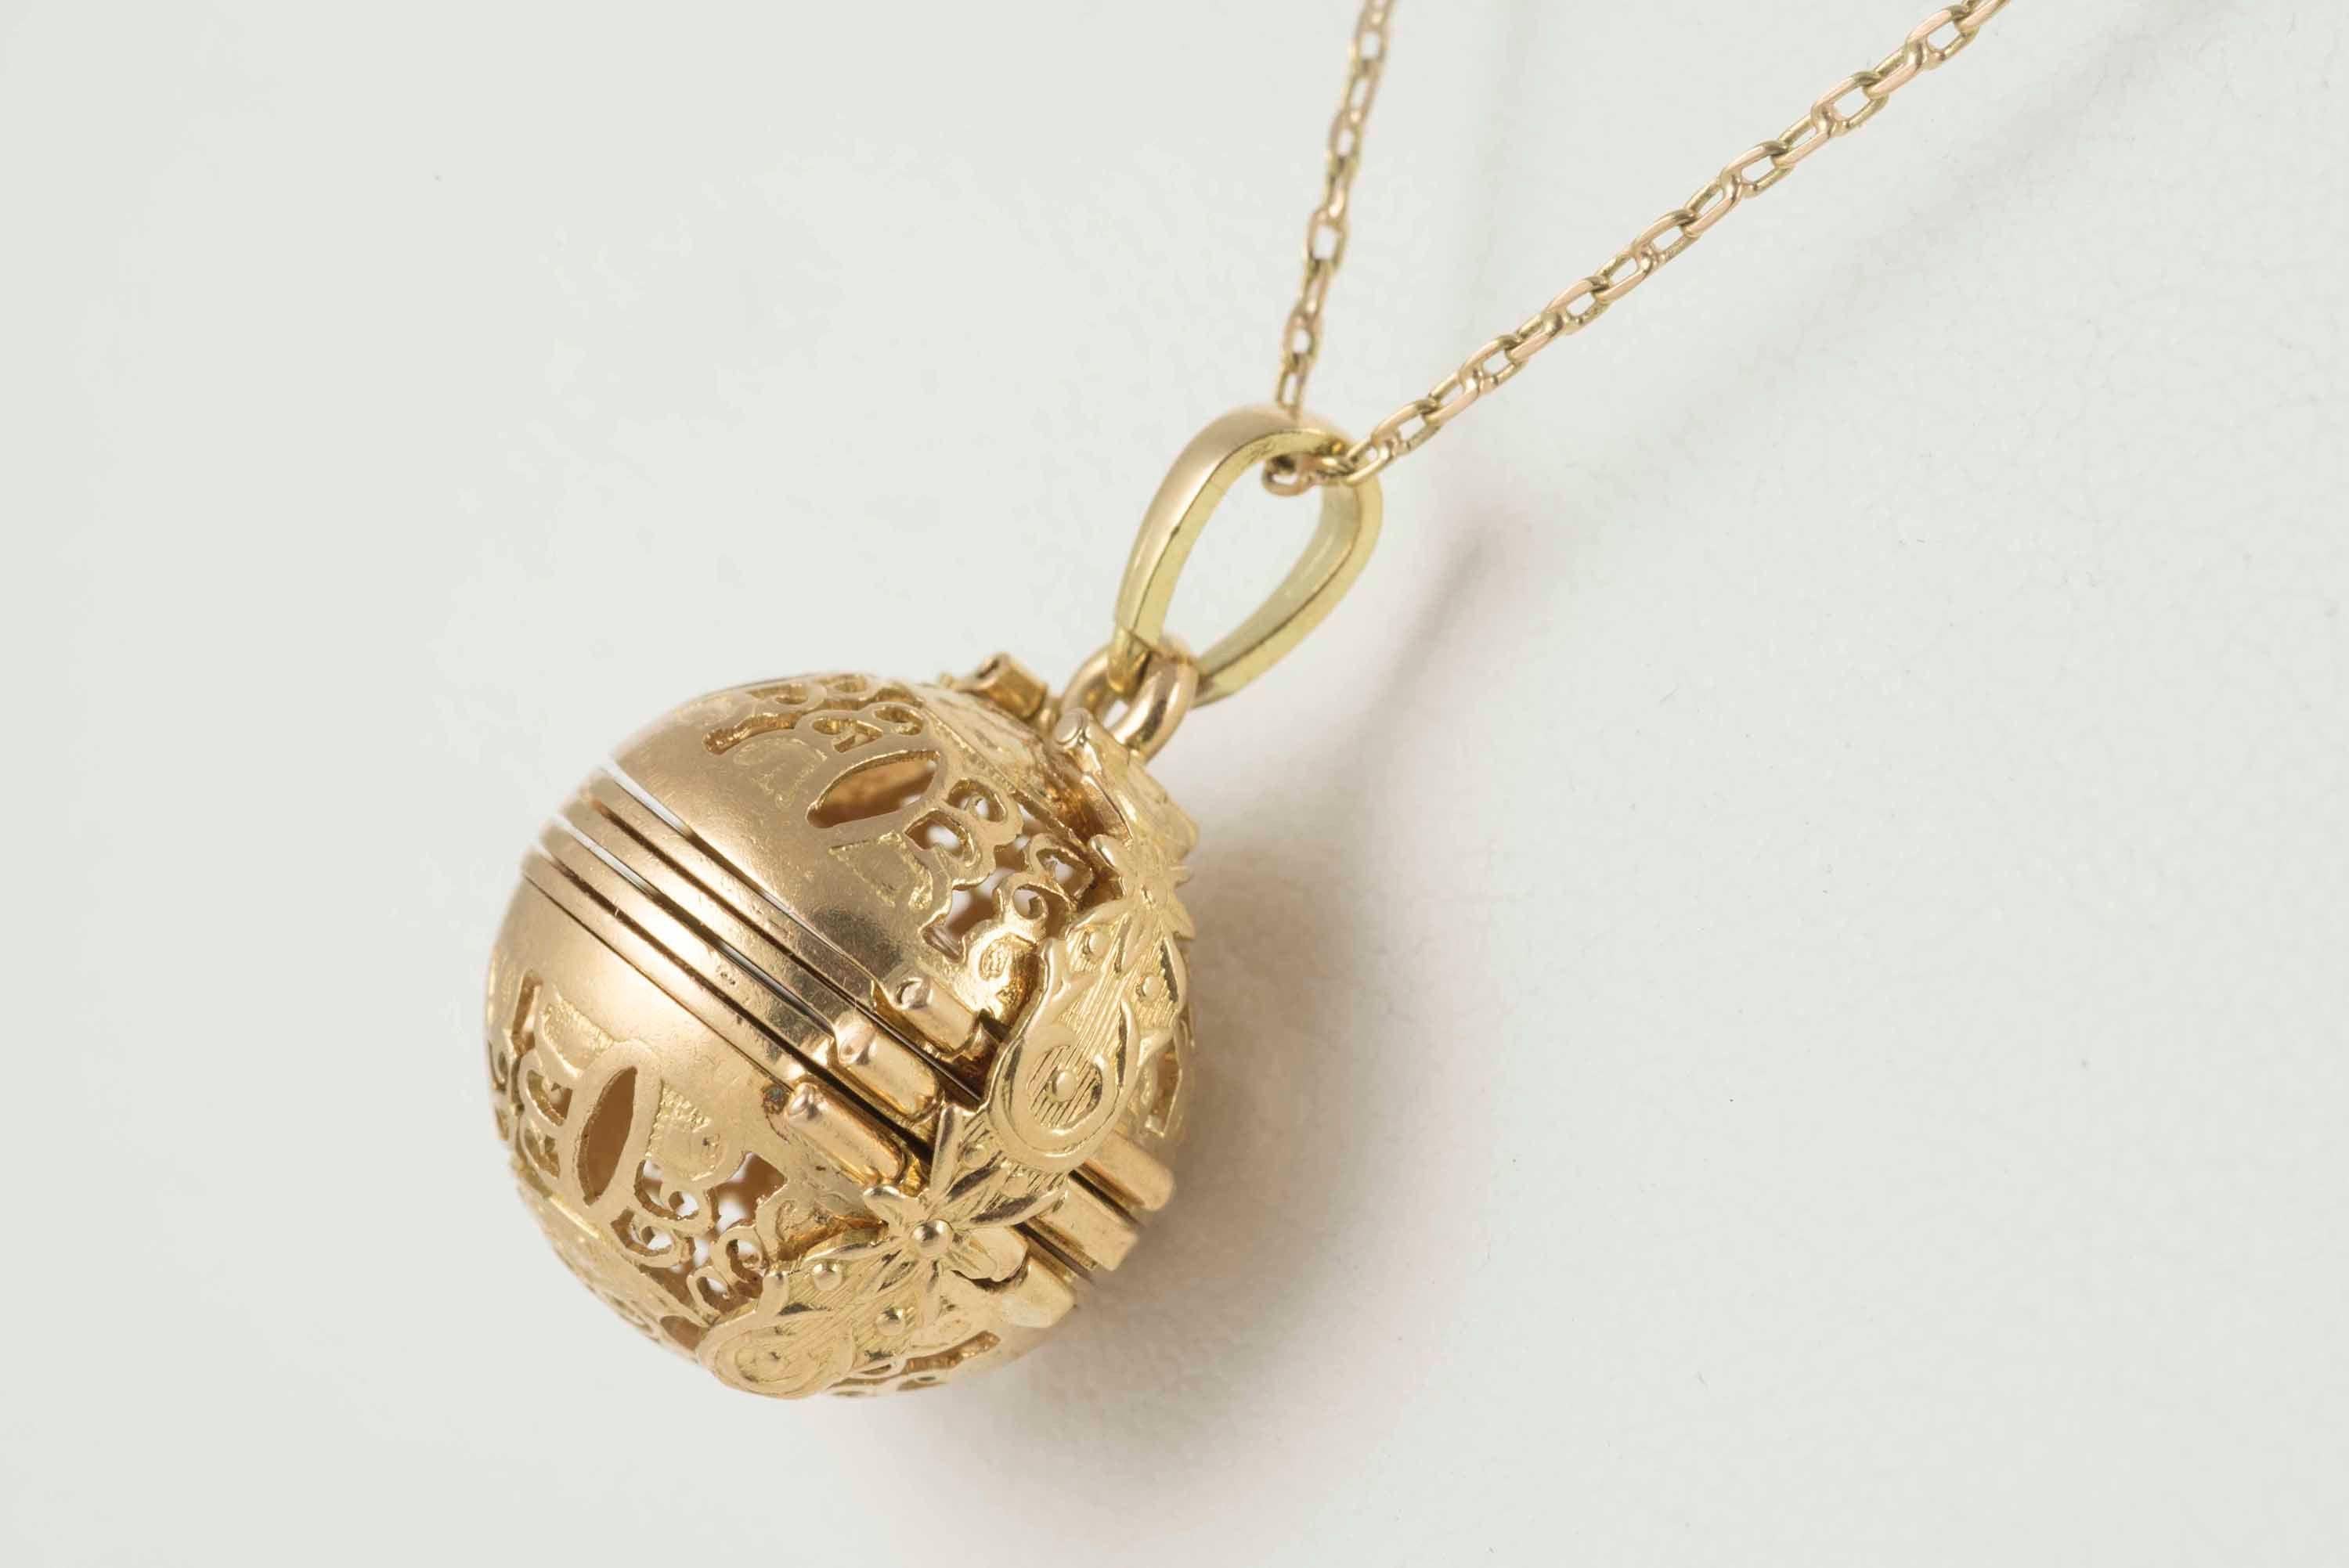 Crafted in the 1880s, this exquisite Victorian ball pendant decoratively pierced and hand fashioned in 14-18kt yellow gold opens to reveal six locket compartments. The chain measures 18 inches long. 